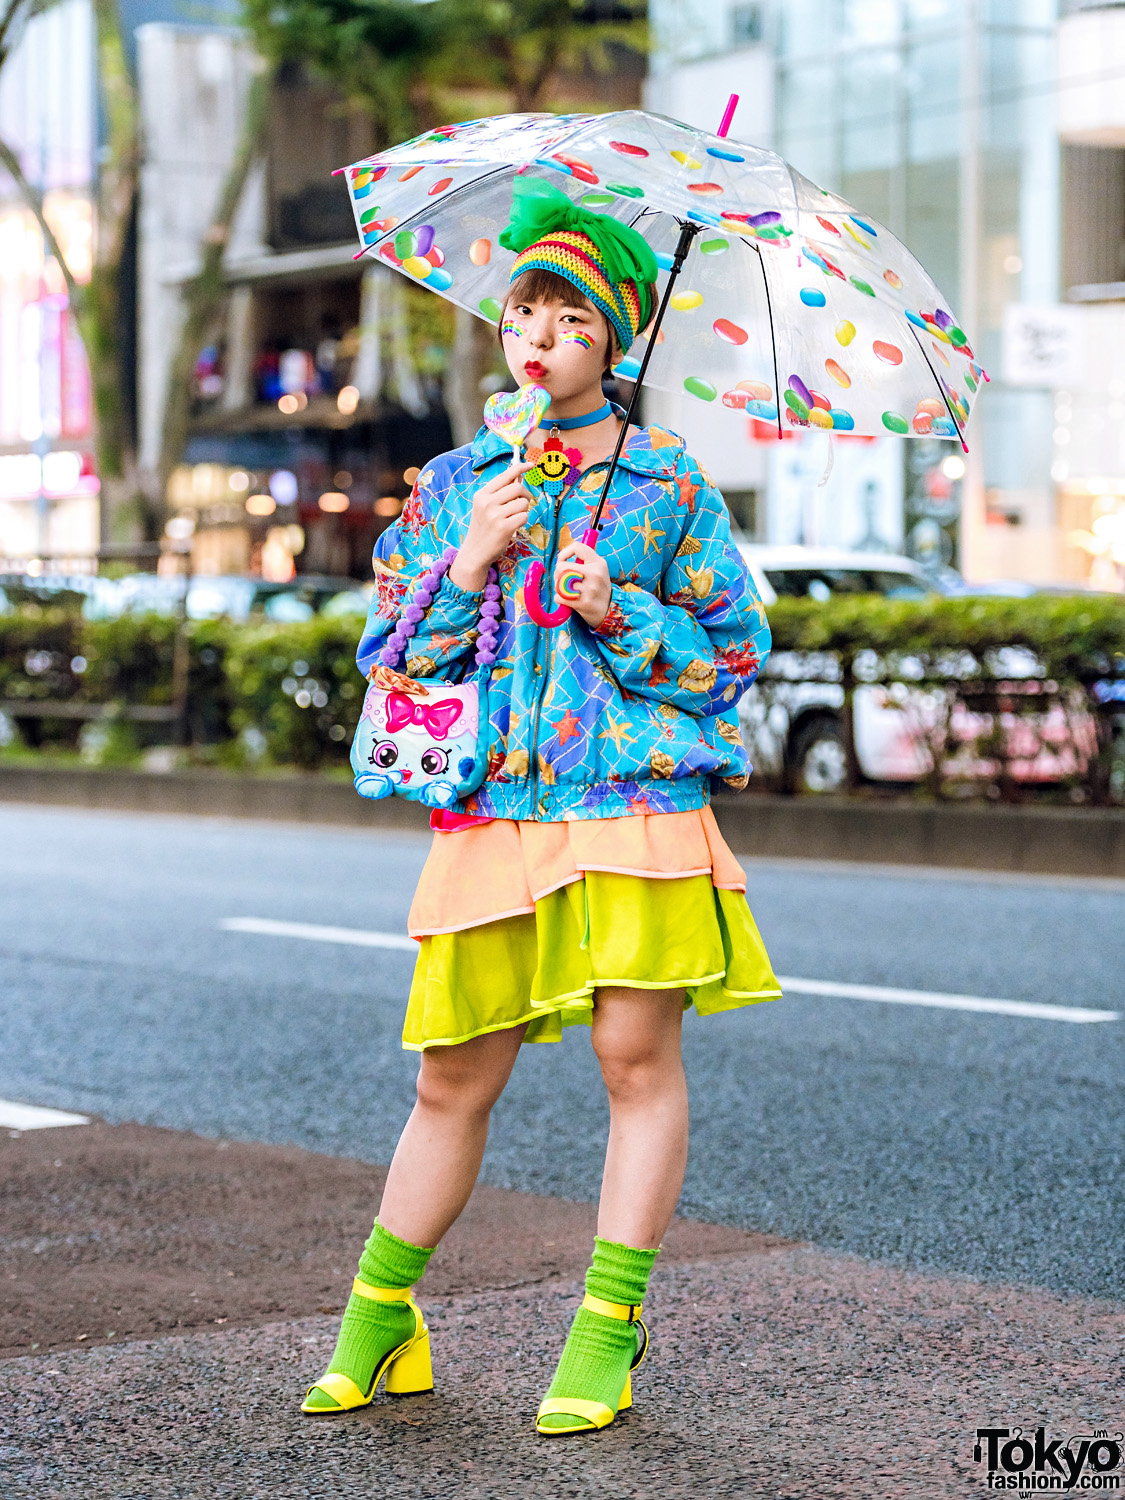 Colorful Kawaii Street Style in Harajuku w/ Printed Jacket, Handmade Ruffle Skirt, Ankle-Strap Sandals, Remake Accessories & Thank You Mart Cat Bag